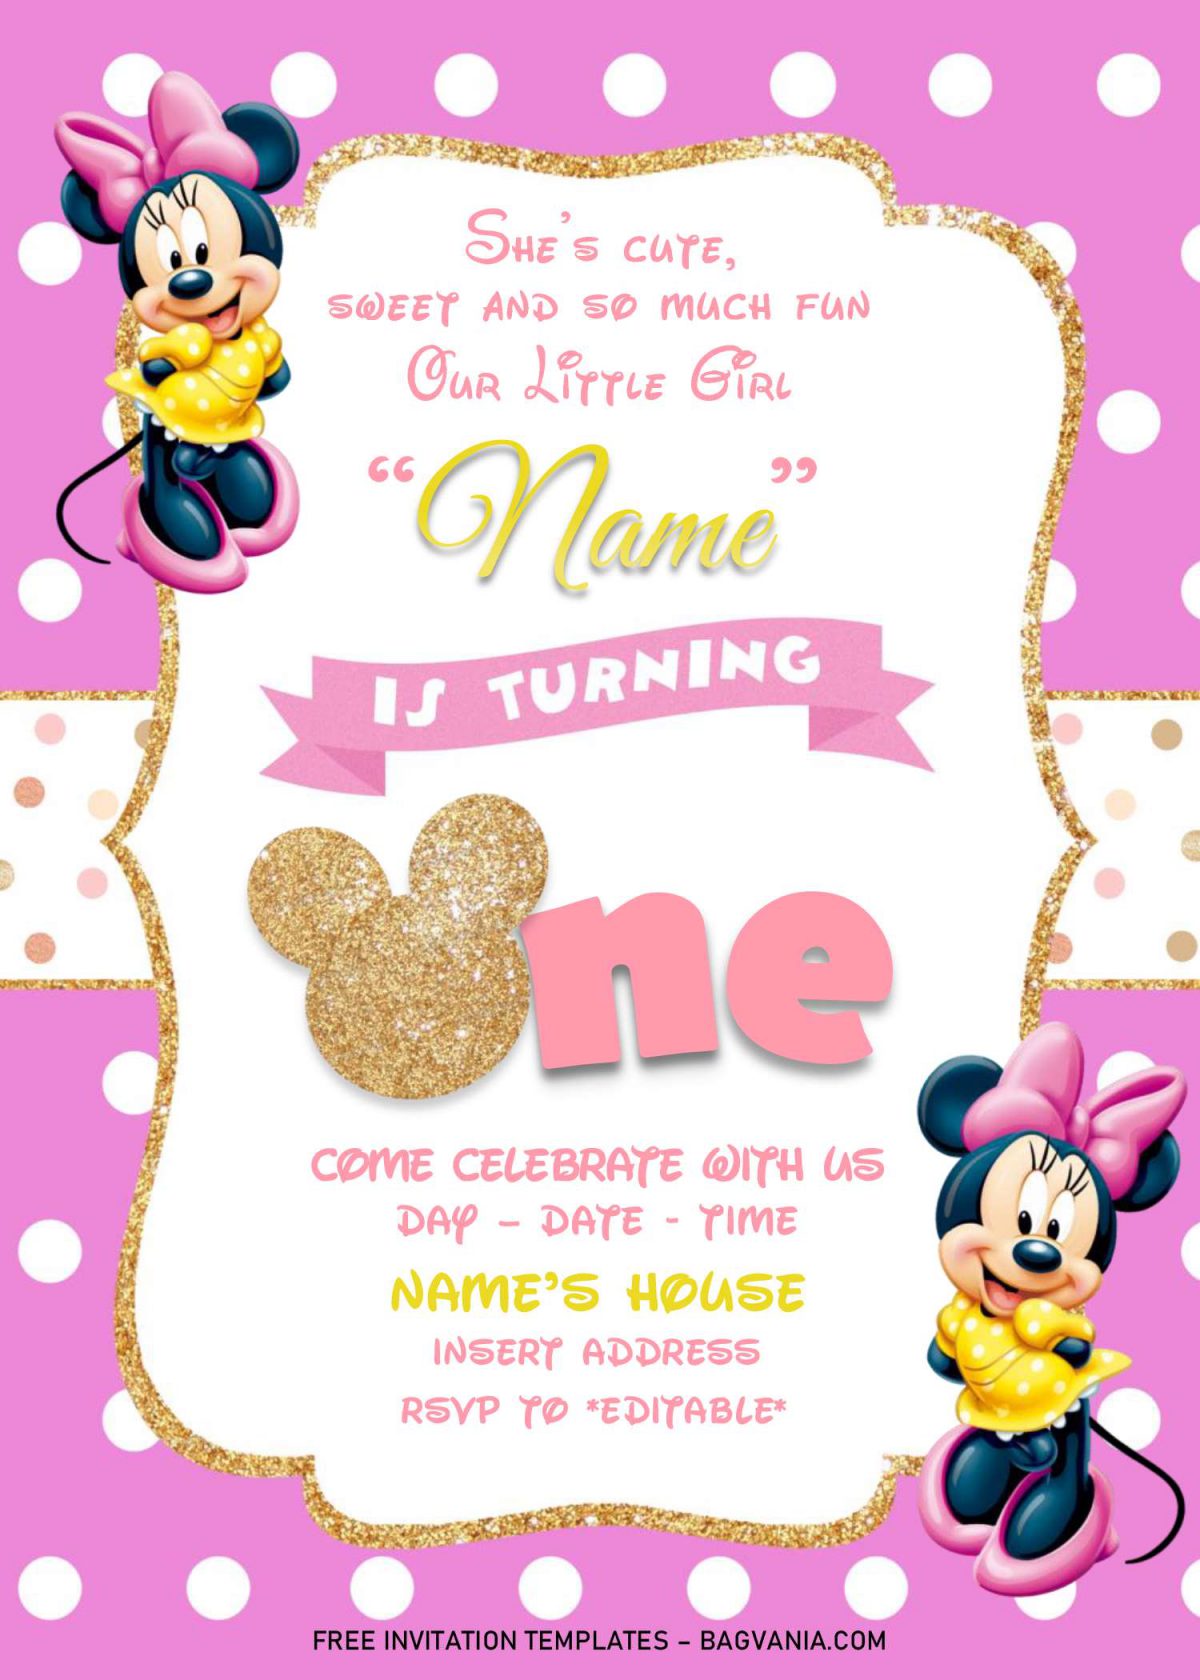 Gold Glitter Minnie Mouse Invitation Templates - Editable .Docx and has gold text frame